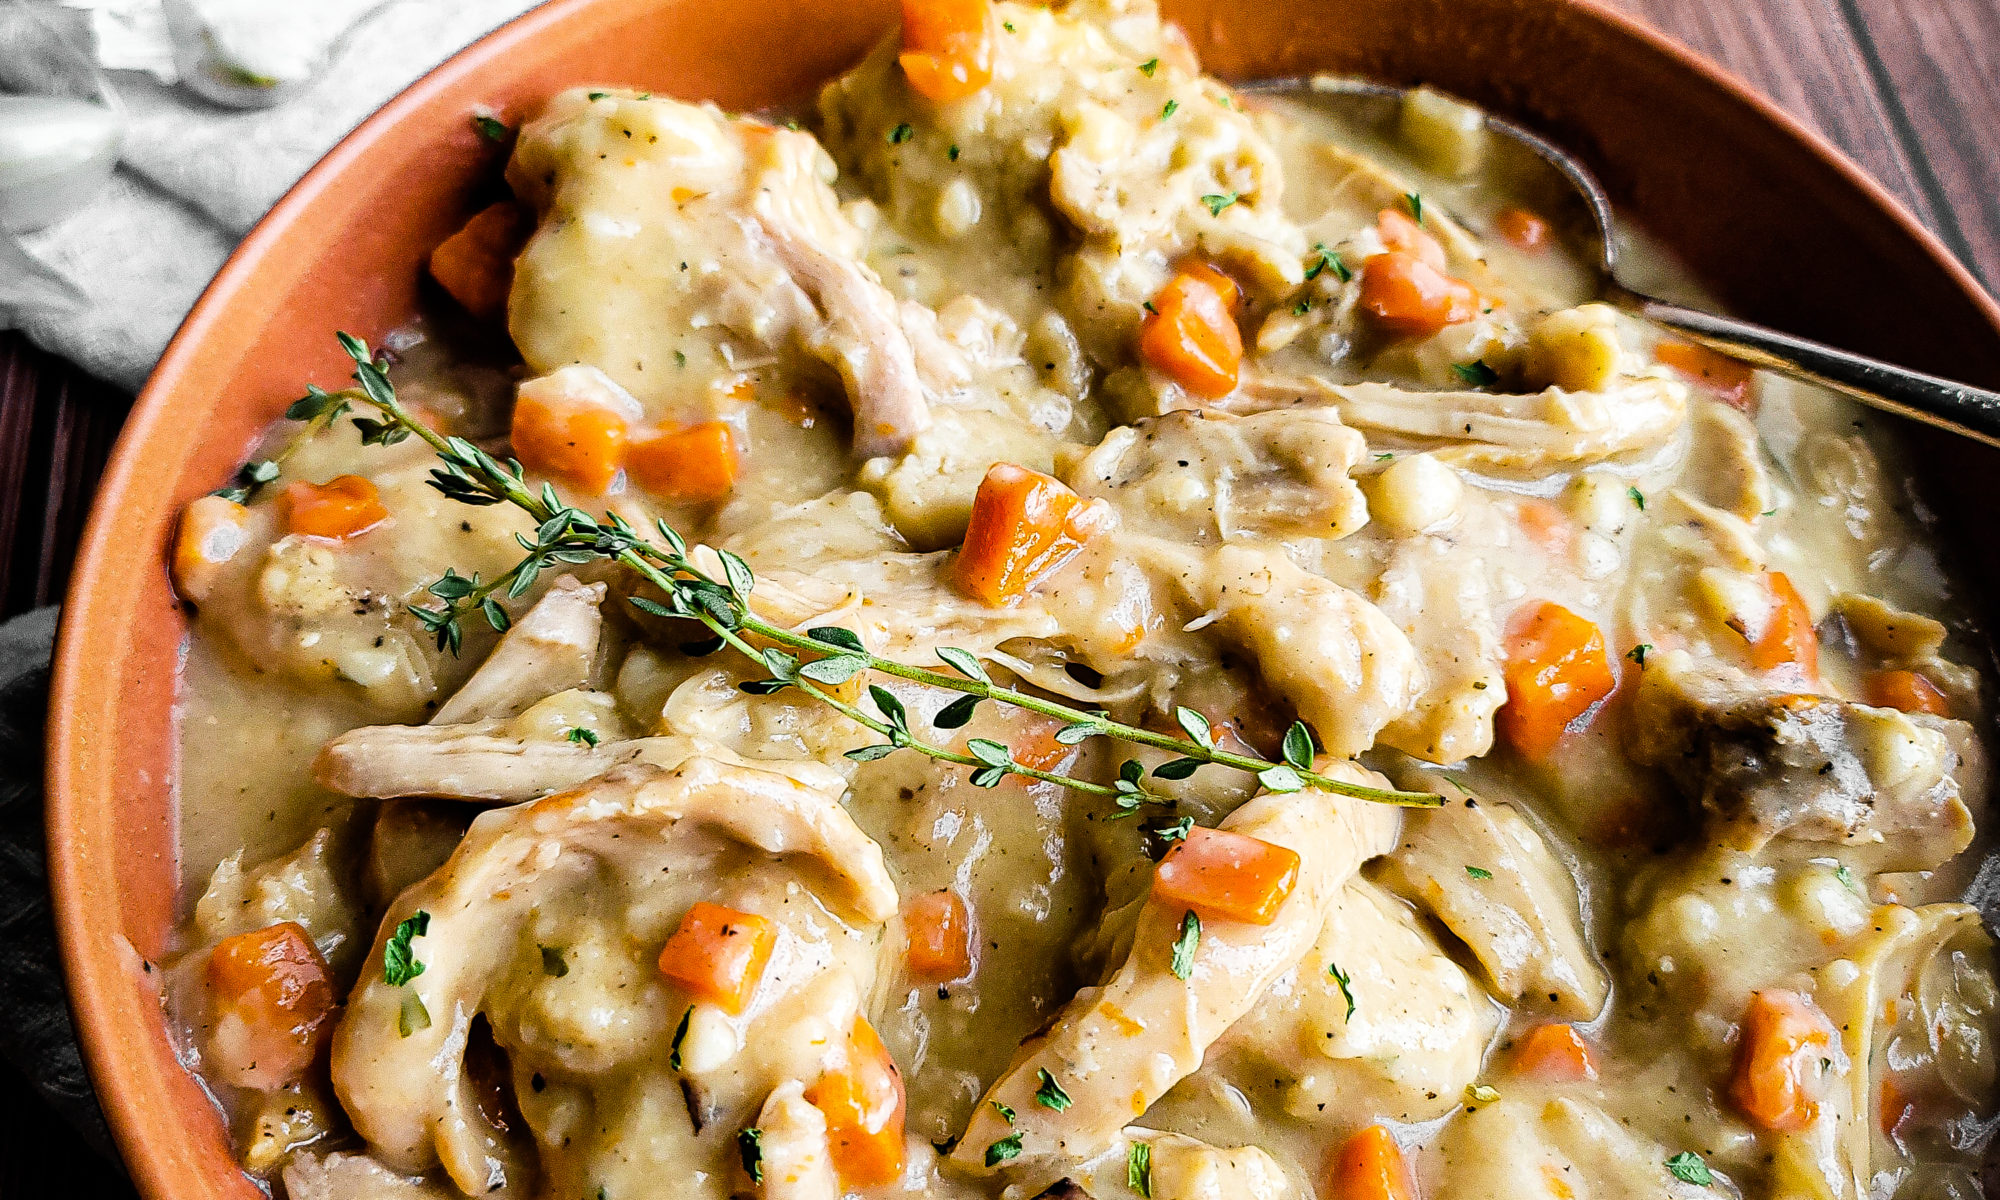 Chicken and dumplings in a bowl with veggies in the background